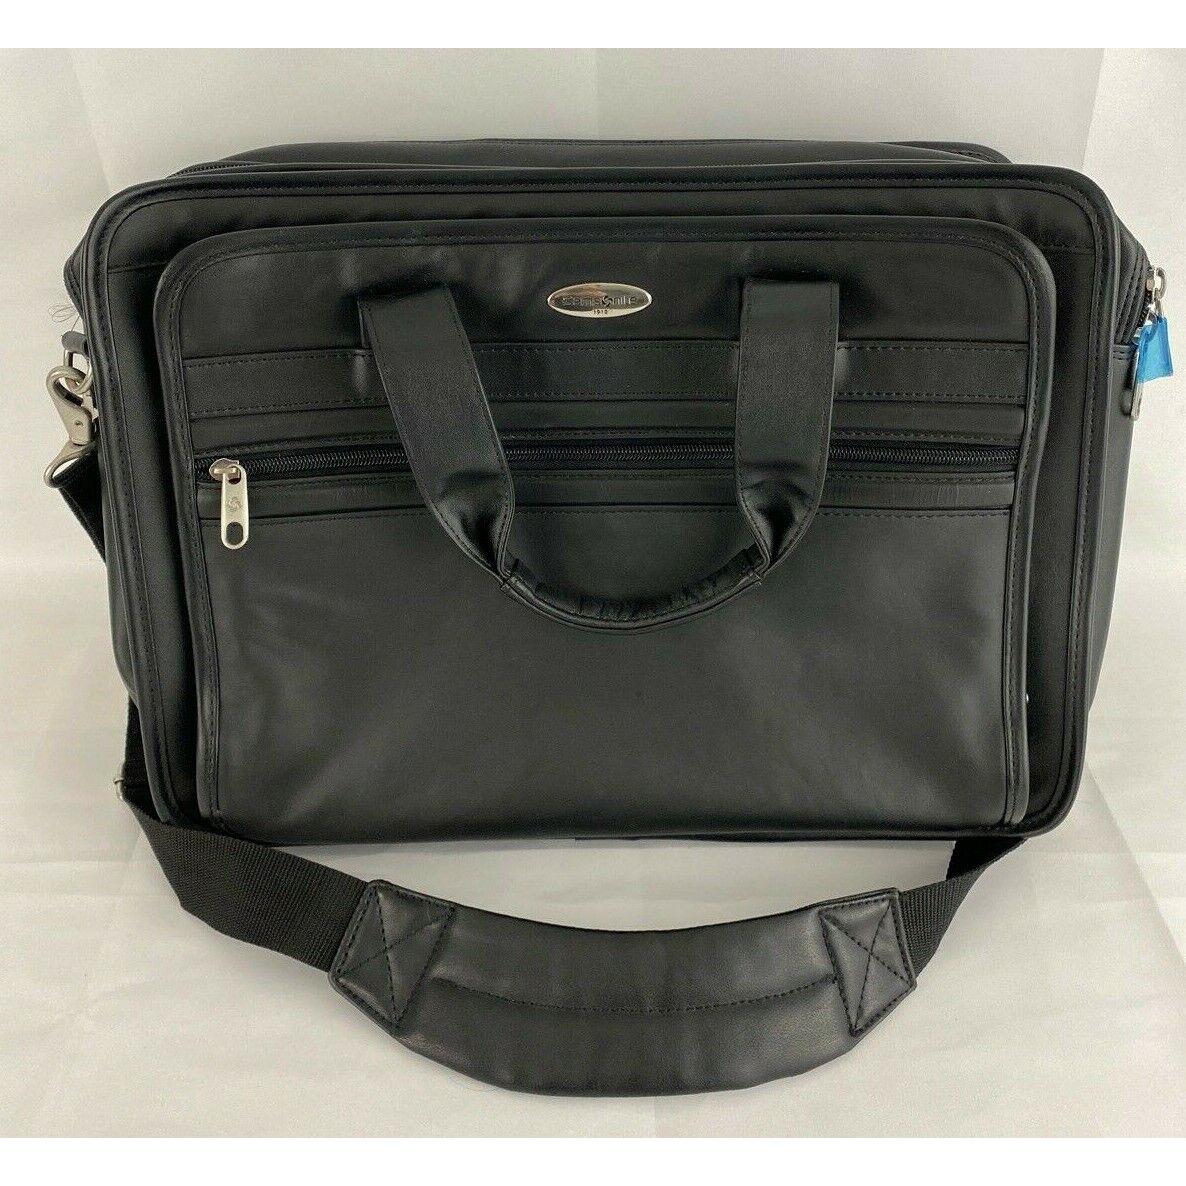 Samsonite Double Compartment Black Laptop Carry On Case - No Tag